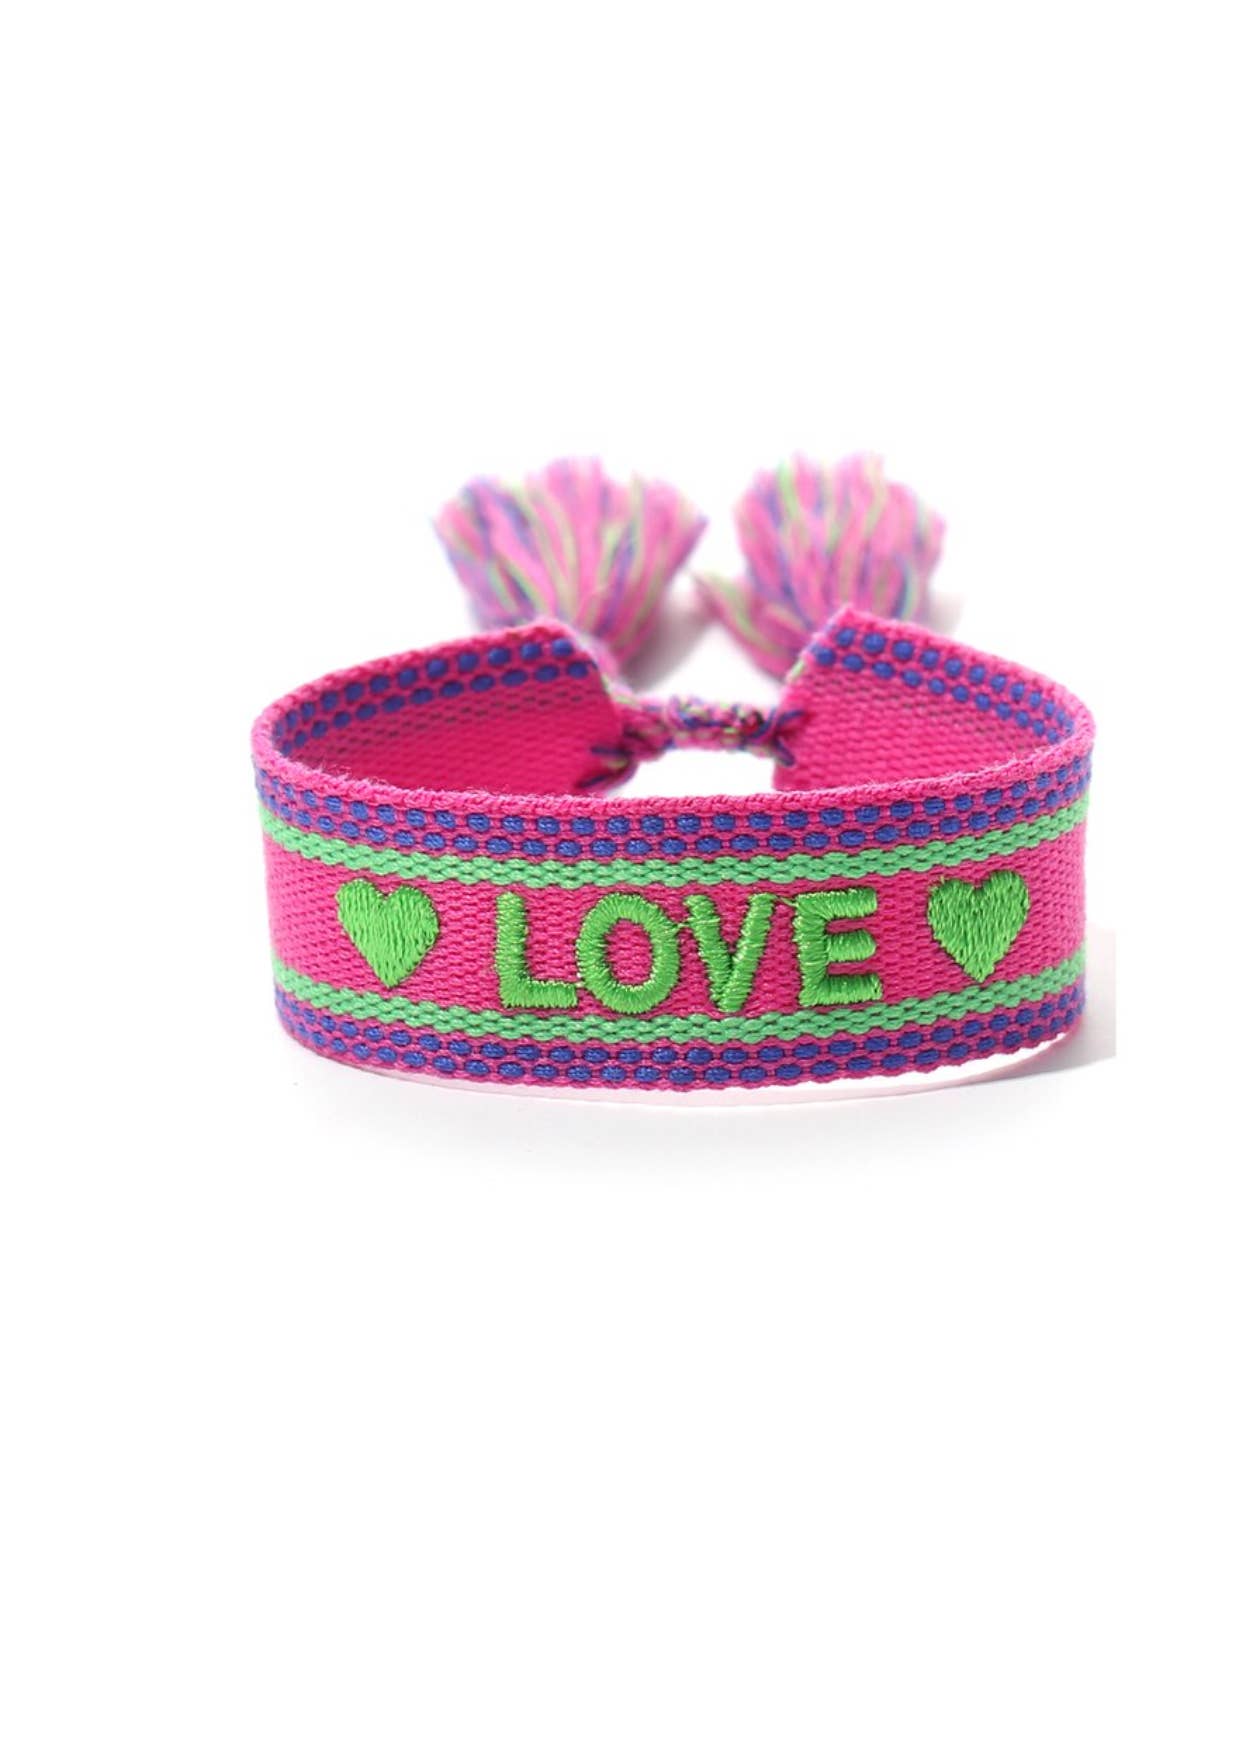 Wristband Love Neon: OS - Something about Sofia